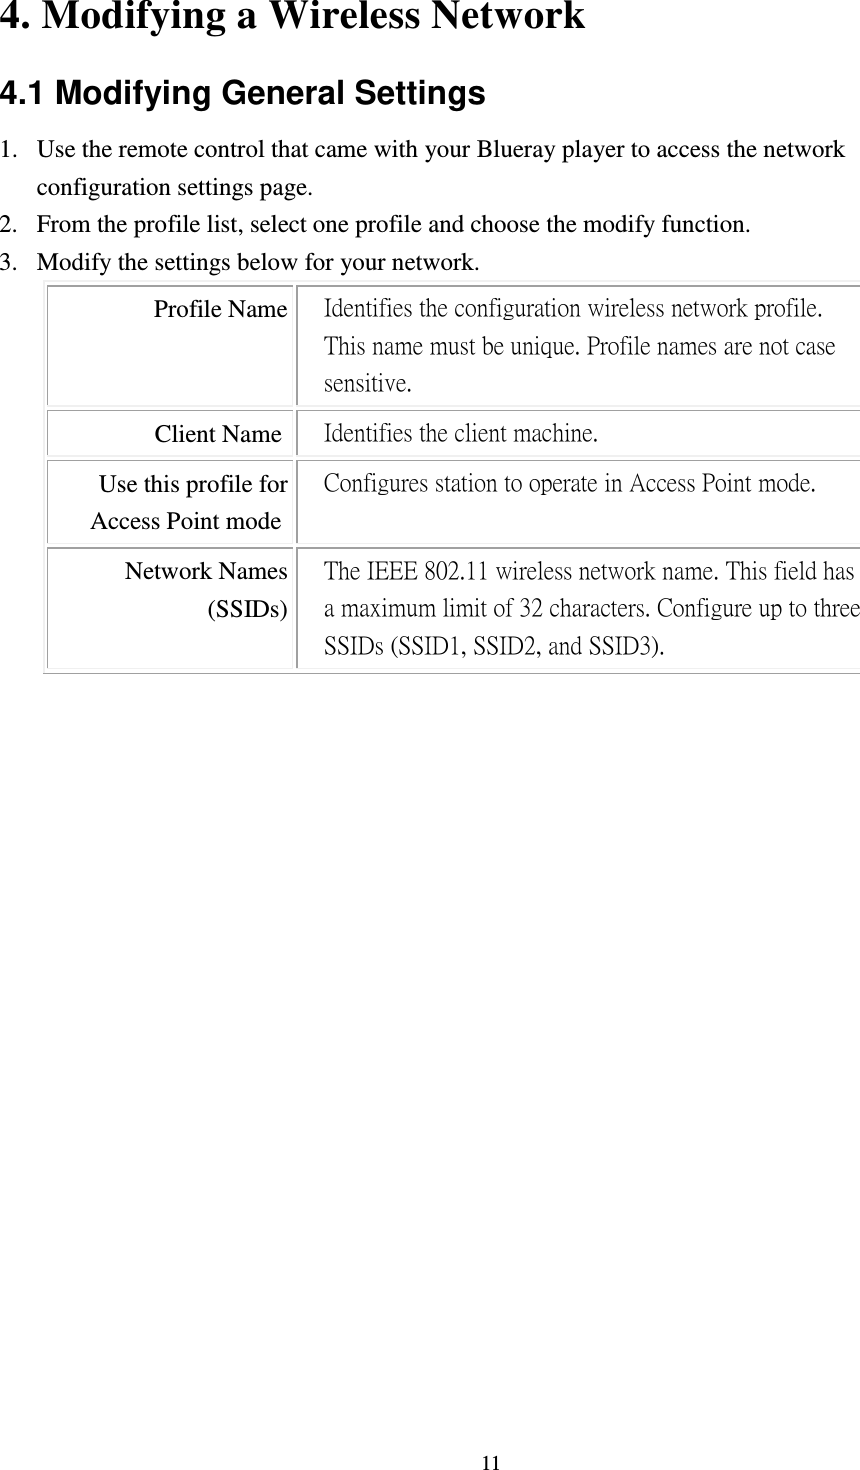  11 4. Modifying a Wireless Network 4.1 Modifying General Settings   1. Use the remote control that came with your Blueray player to access the network configuration settings page.   2. From the profile list, select one profile and choose the modify function.   3. Modify the settings below for your network. Profile Name Identifies the configuration wireless network profile. This name must be unique. Profile names are not case sensitive. Client Name  Identifies the client machine.   Use this profile for Access Point mode  Configures station to operate in Access Point mode.   Network Names (SSIDs) The IEEE 802.11 wireless network name. This field has a maximum limit of 32 characters. Configure up to three SSIDs (SSID1, SSID2, and SSID3).   